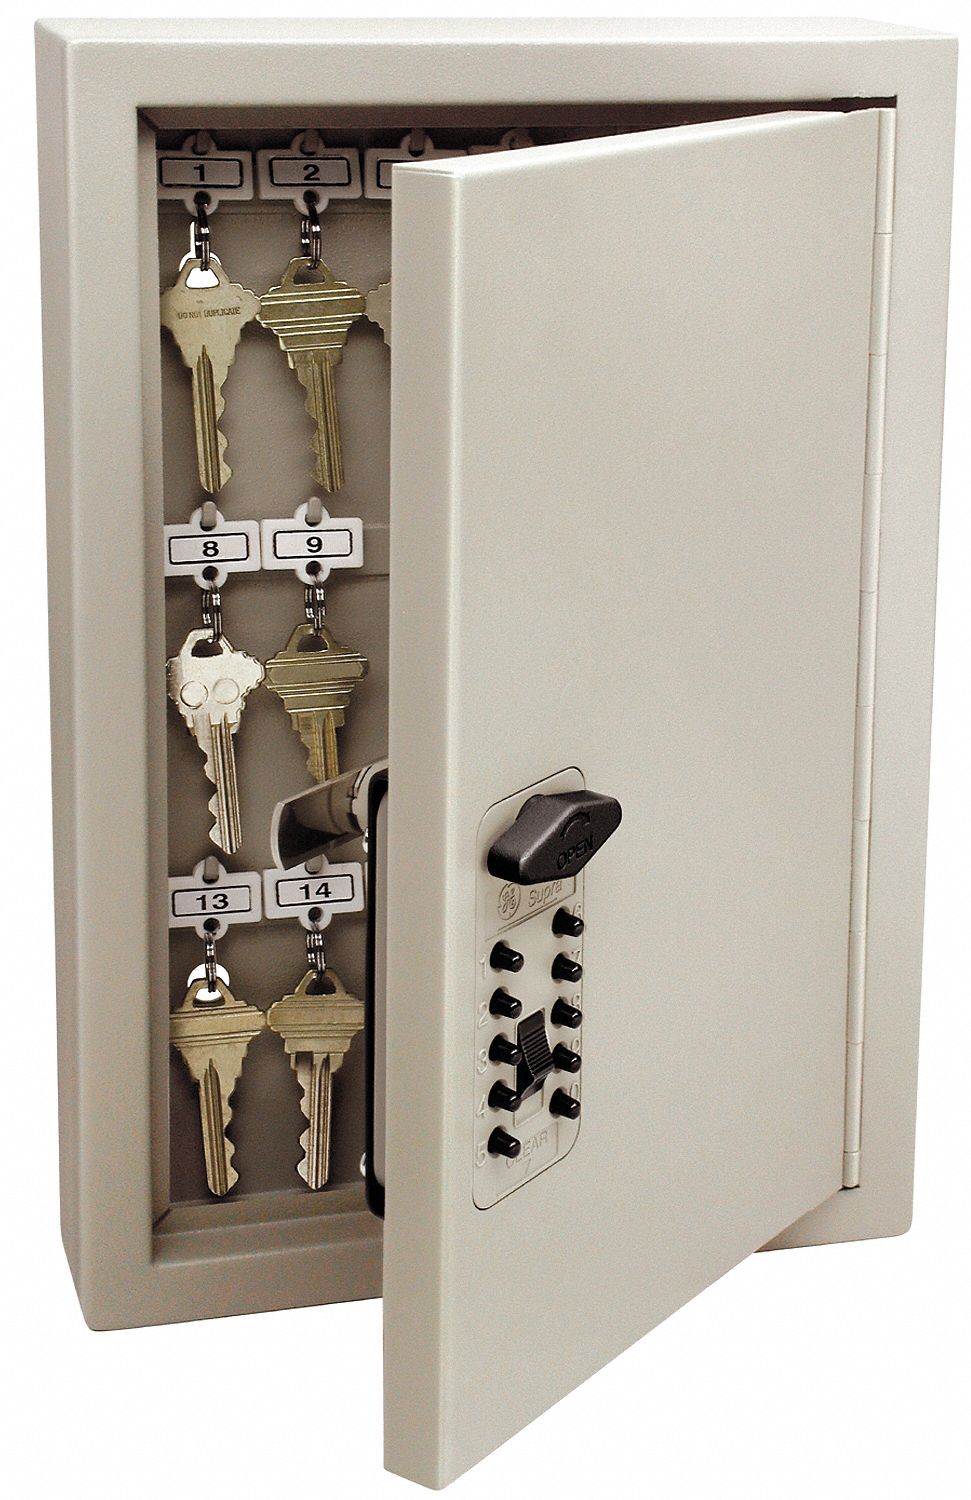 Gray Schools or Business Flexzion Key Cabinet Steel Lock Box with 40 Capacity Colored Key Tags & Hooks Security Storage Lock Box System for Homes Hotels Wall Mounted Safe Organizer 